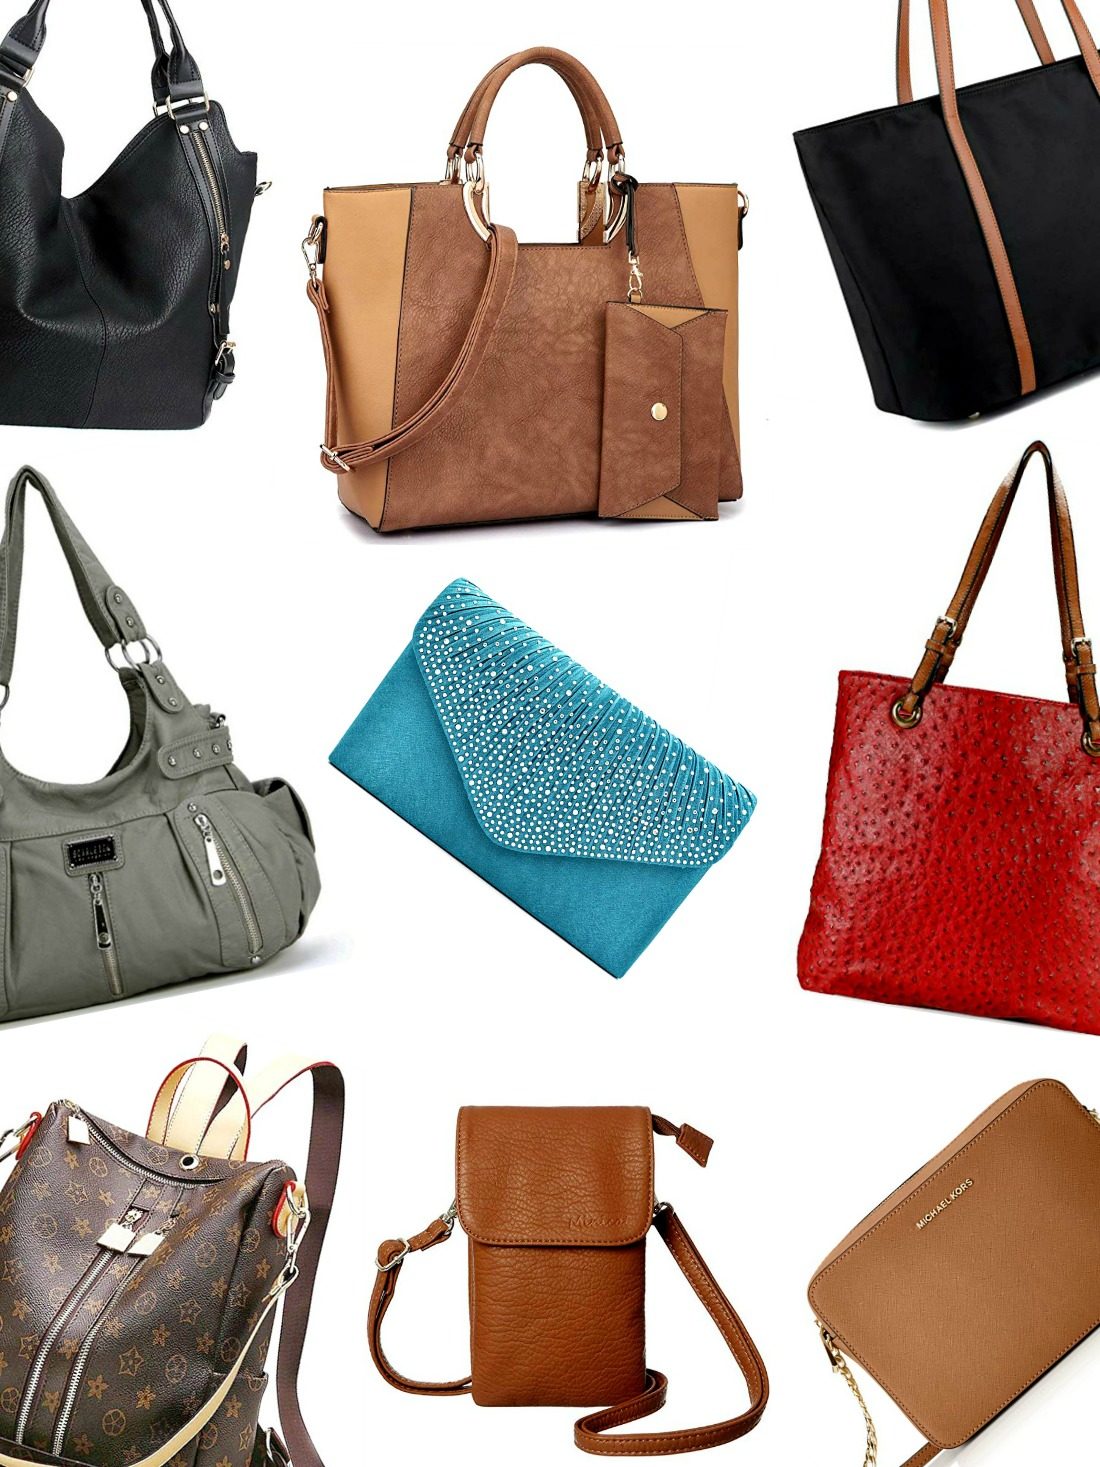 Best Handbags For Women That Go With Everything!